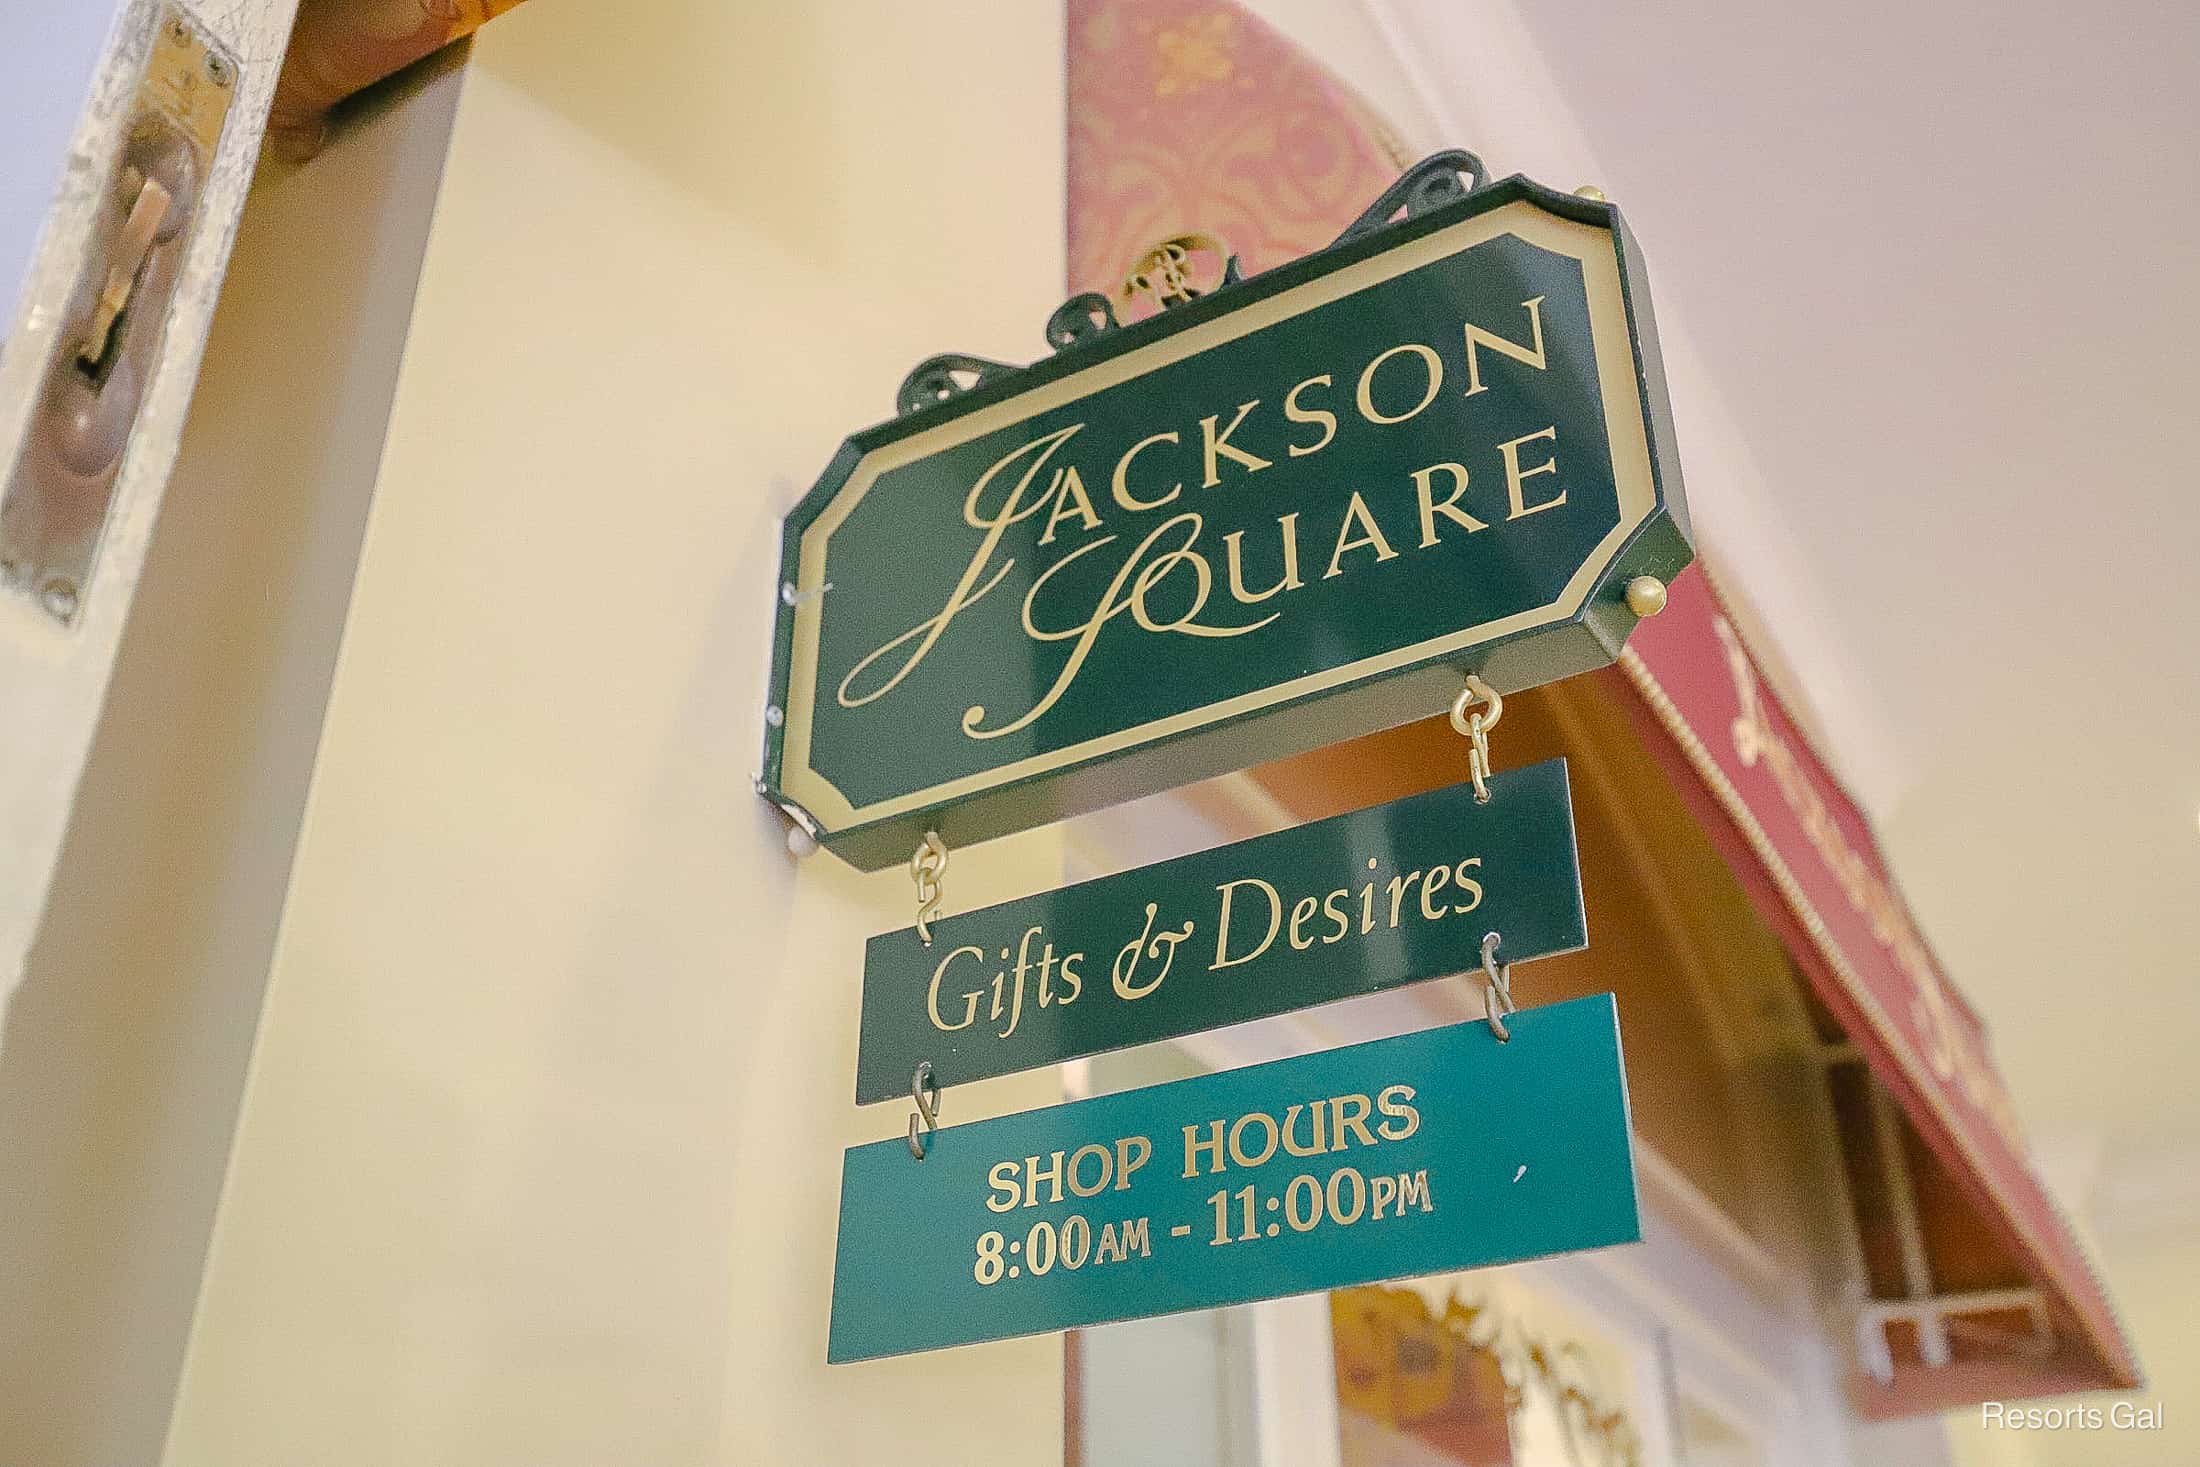 a sign that says Jackson Square Gifts and Desires Shop Hours 8:00 a.m. until 11:00 p.m.